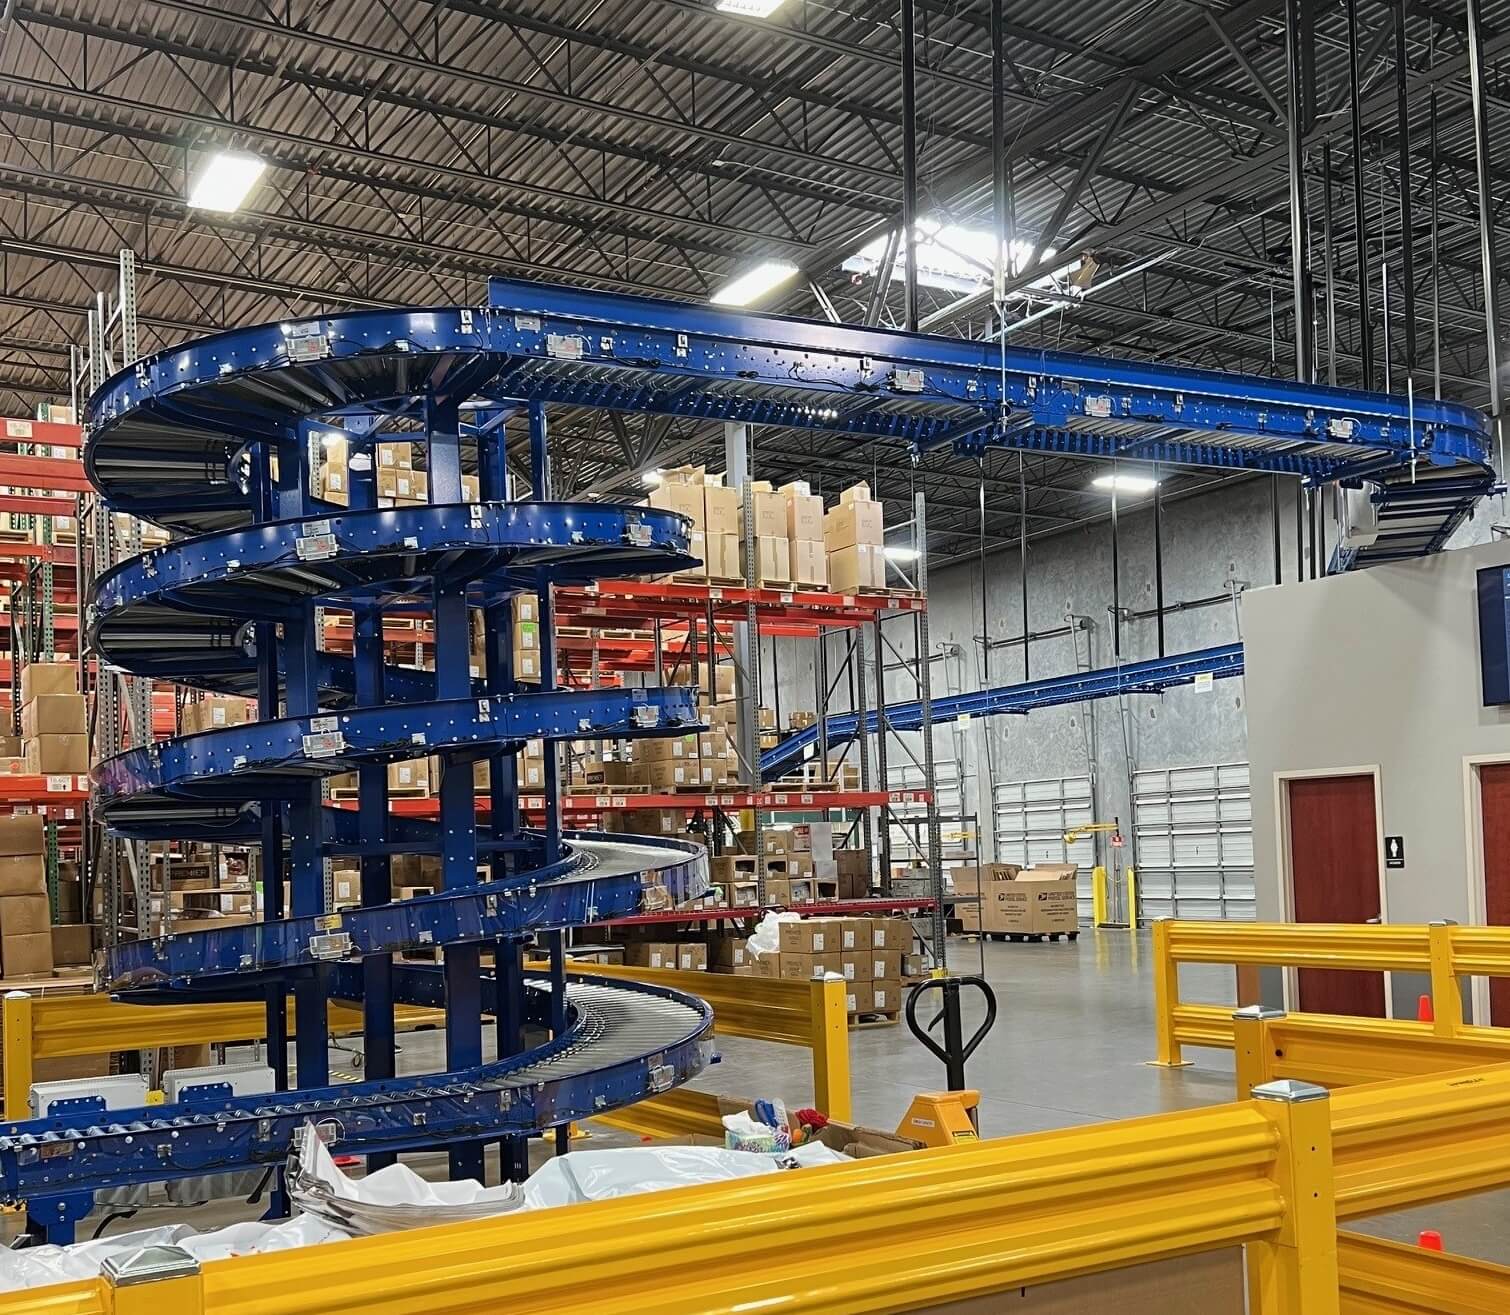 A motor-driven roller (MDR) spiral turn lifts packages to an overhead conveyor that delivers them to shipping.